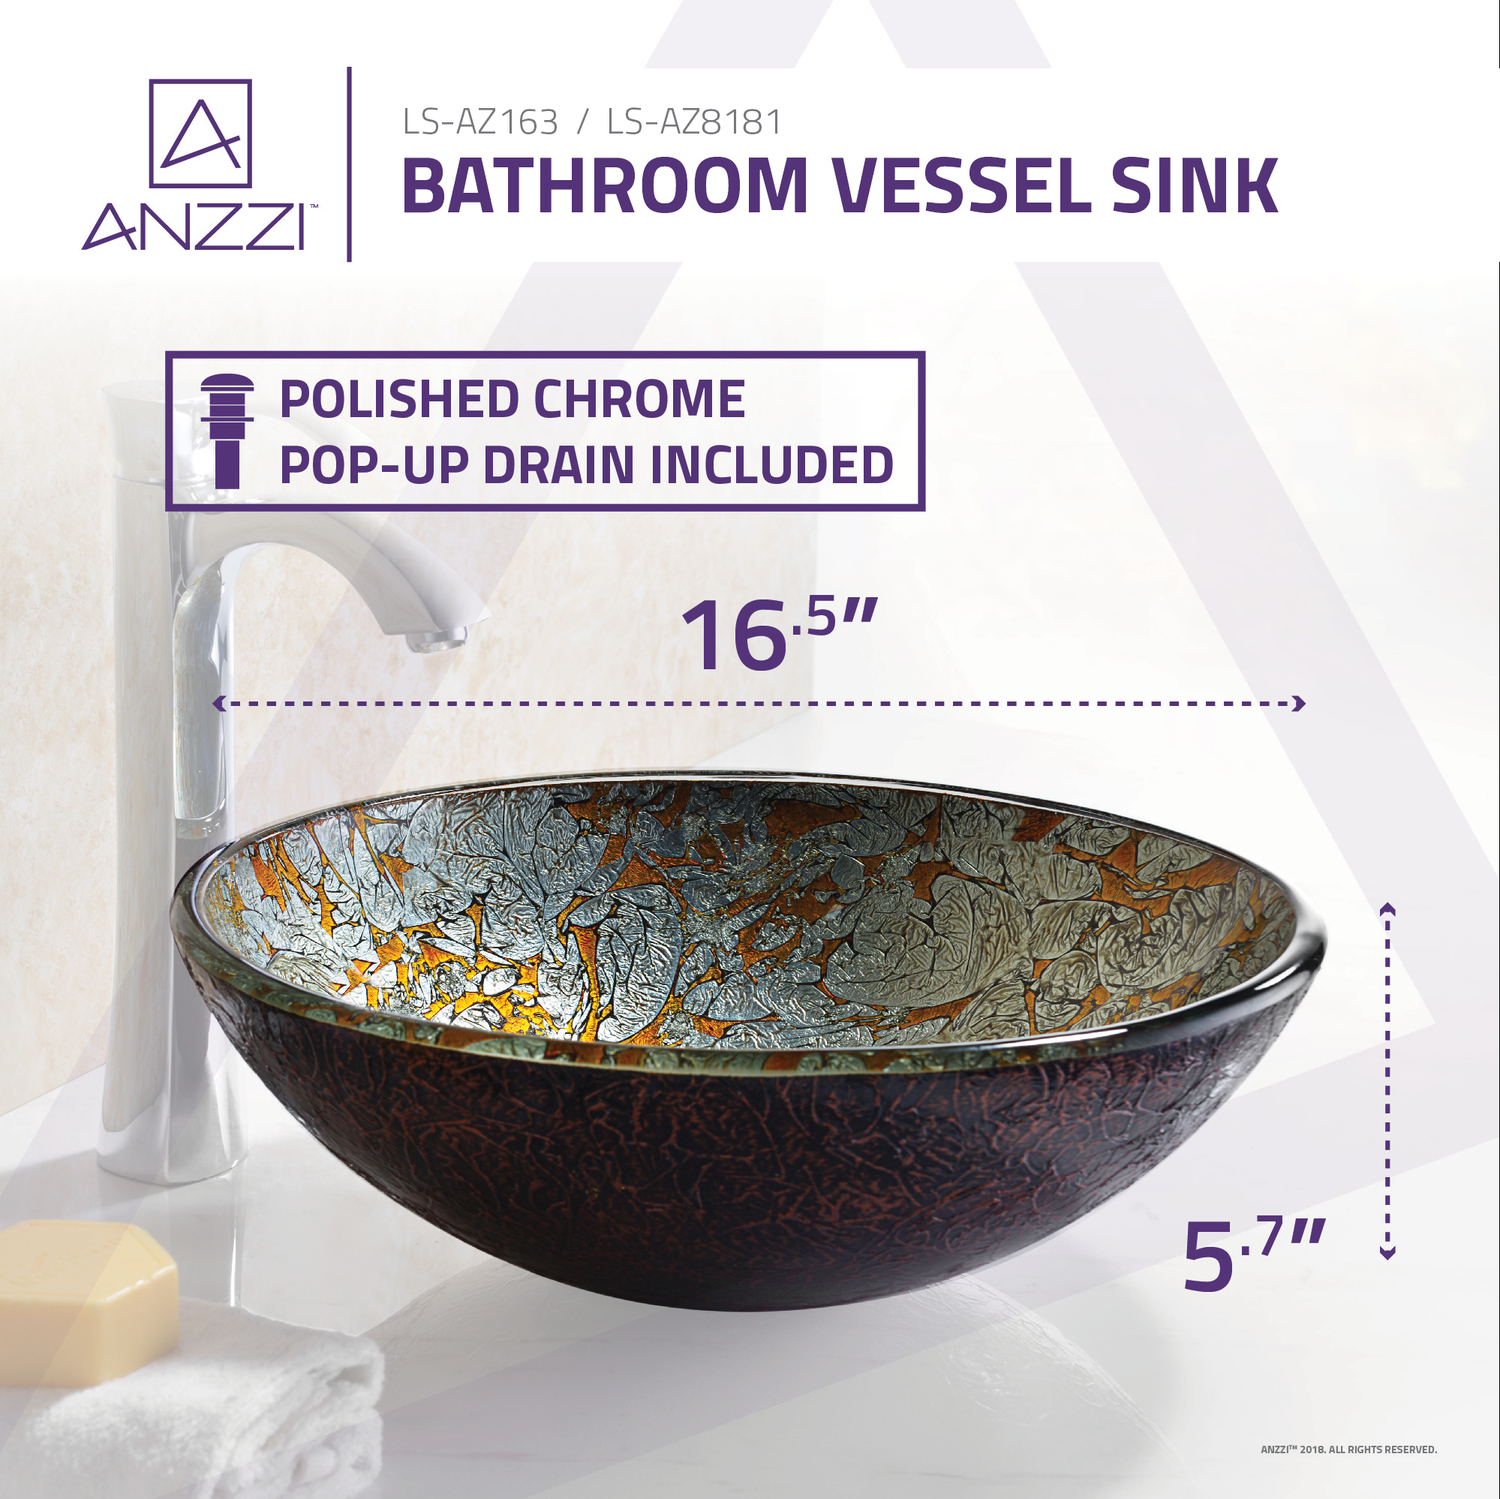 glass vanity top Anzzi BATHROOM - Sinks - Vessel - Tempered Glass Multi-Colored